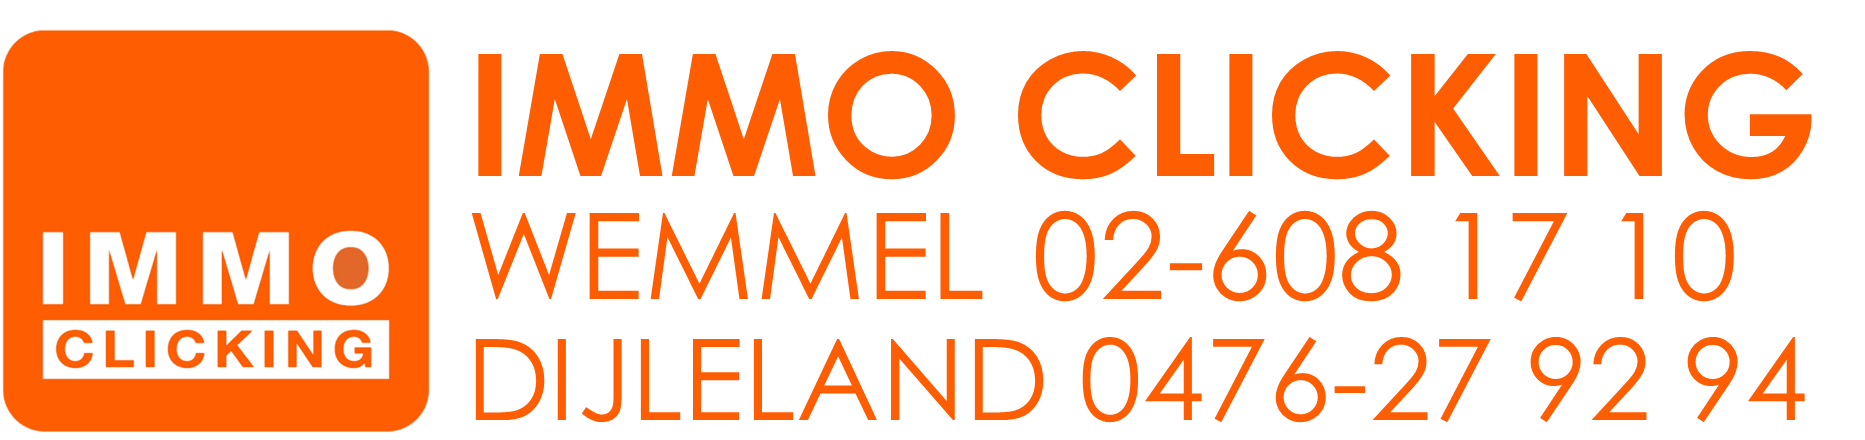 immo clicking logo_office:2004